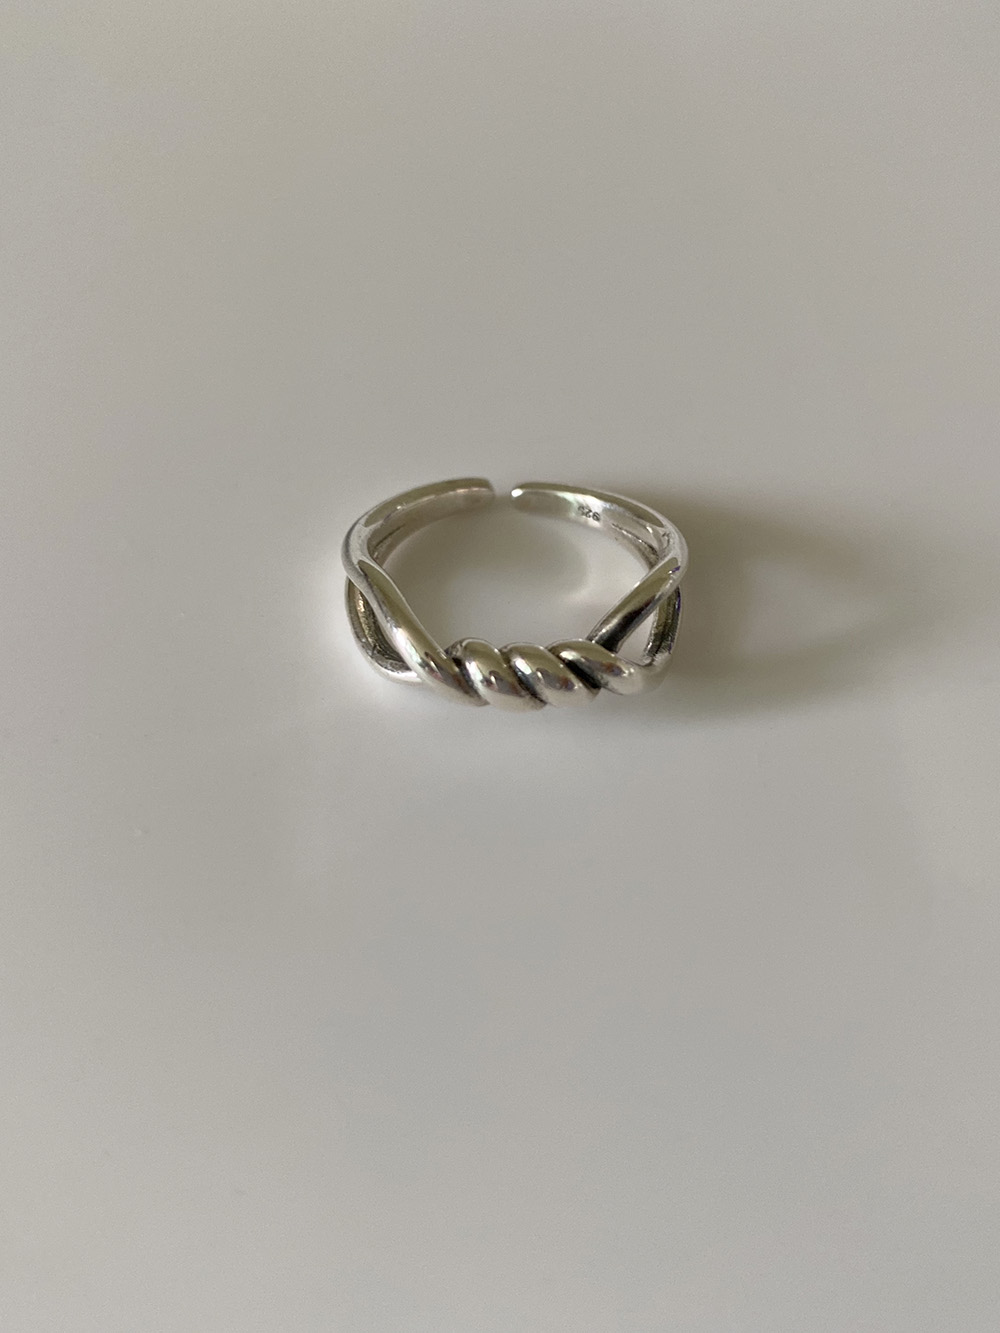 [92.5 silver] rope twist ring